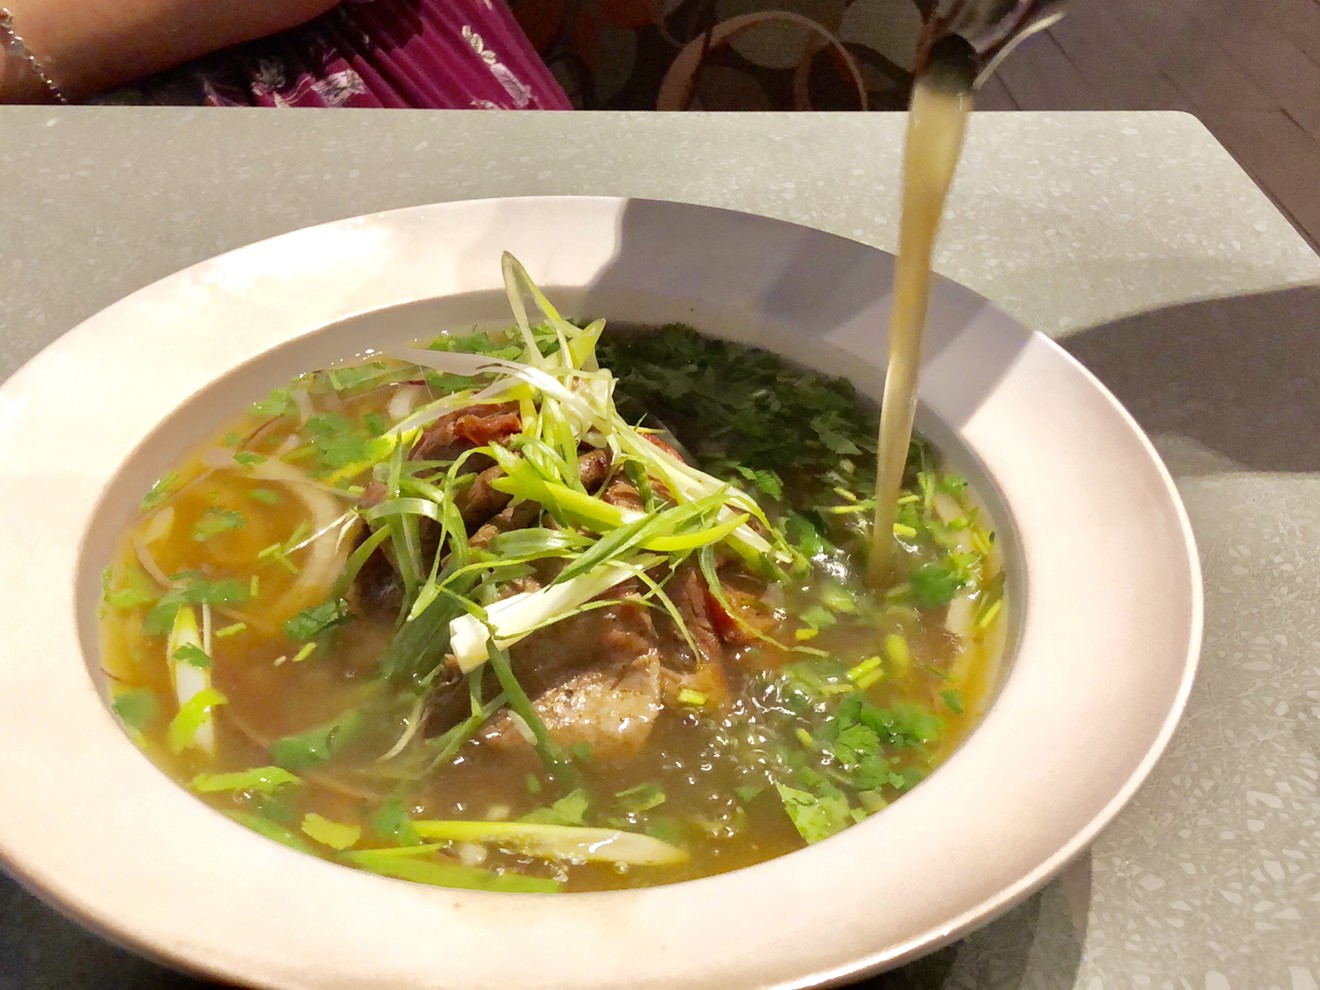 Oxtail pho is topped with thinly sliced Wagyu beef at Saigon House, taking a family recipe and making it even better.